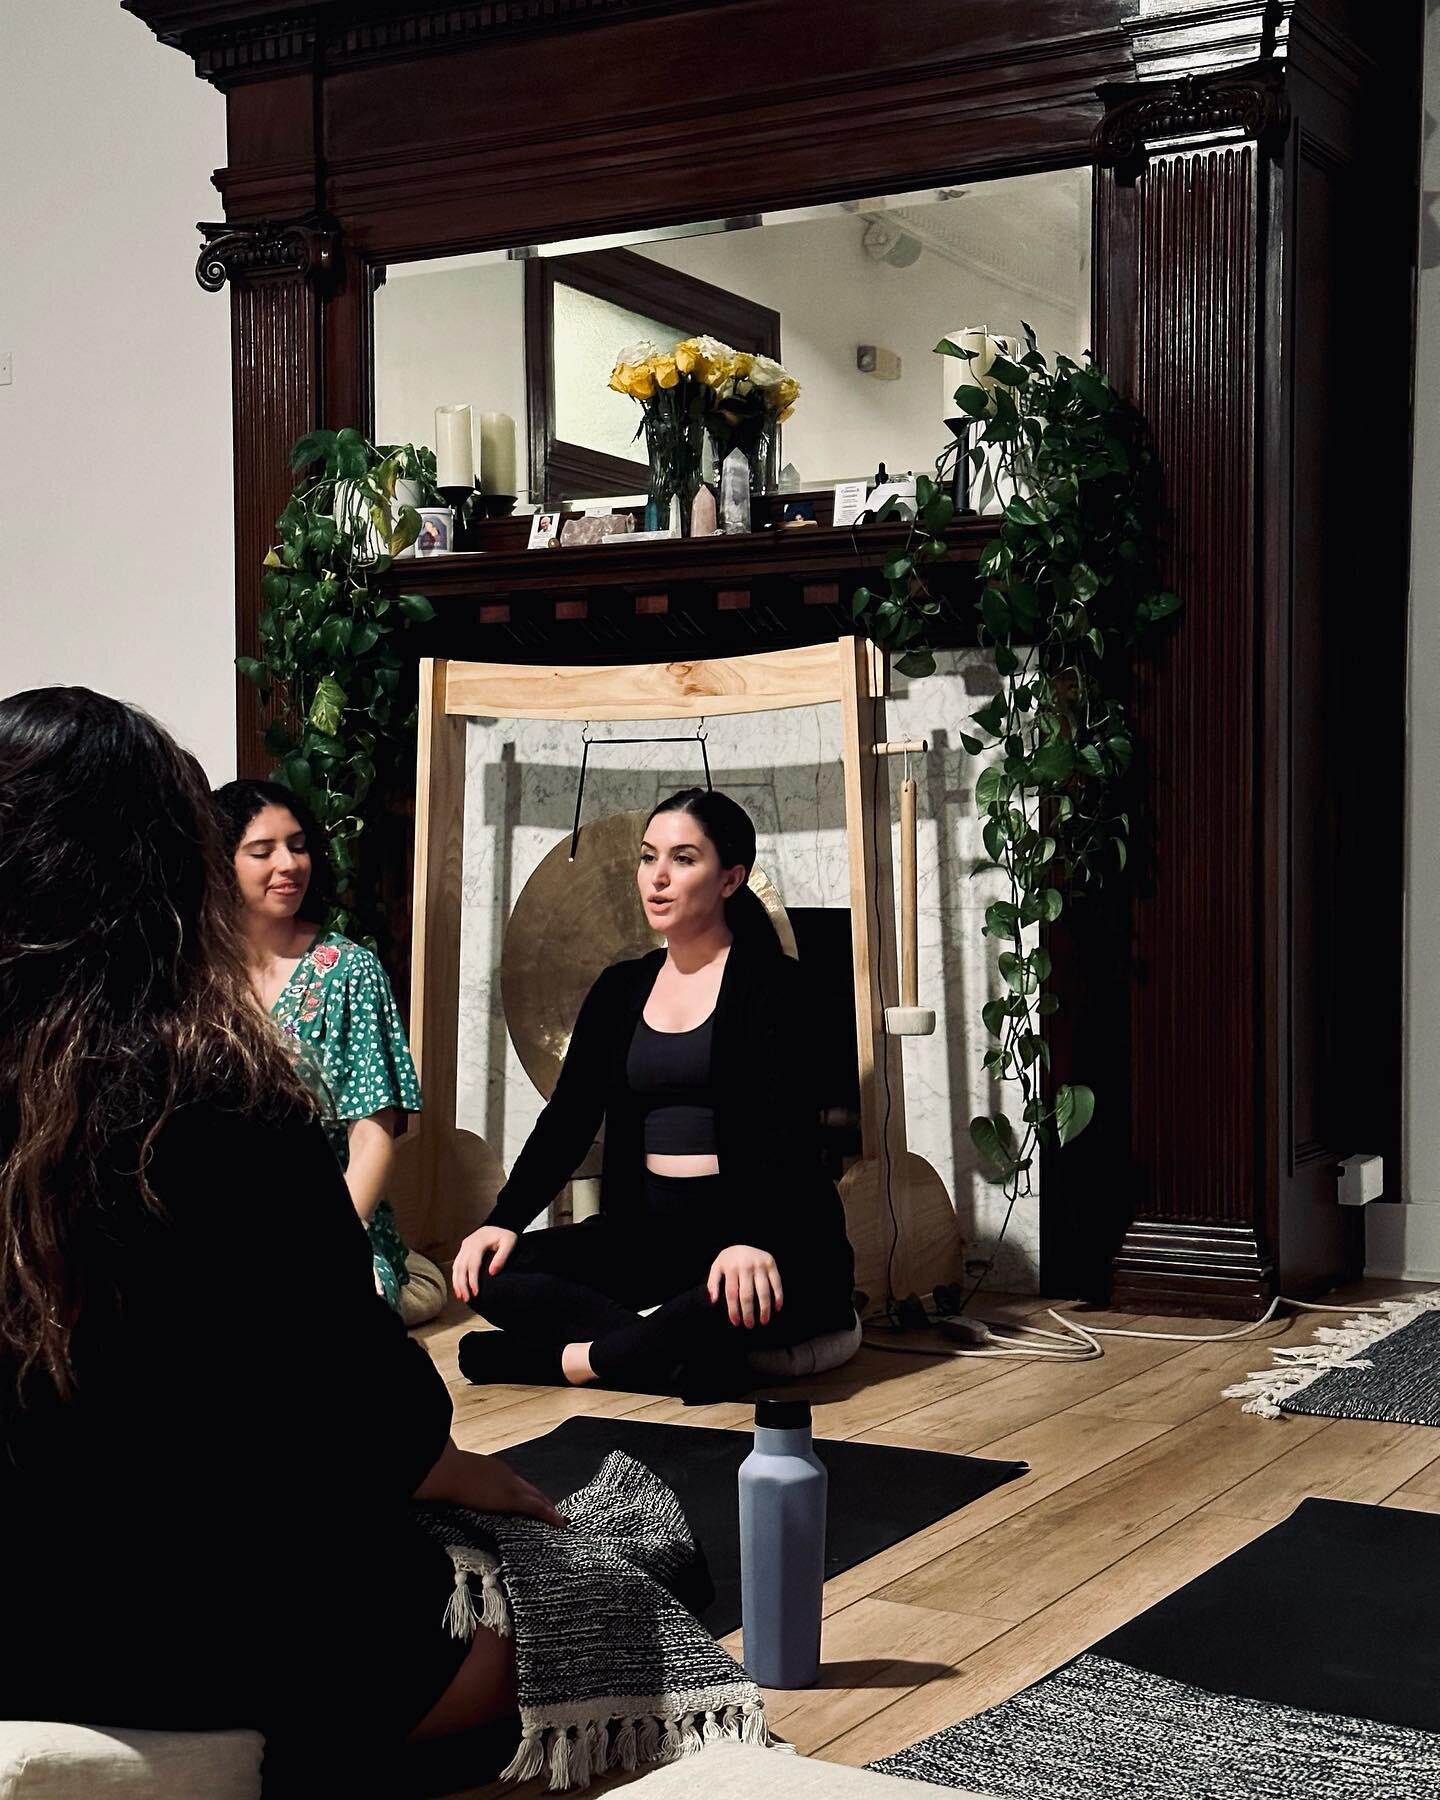 Thank you to my yoga mentor @smilinginsavasana for giving me the opportunity to join her at @yogisunidos and @yogarenewhoboken &lsquo;s event &ldquo;Rhythms of Wellbeing&rdquo;. It was a privledge to guide such a beautiful community in exploring thei